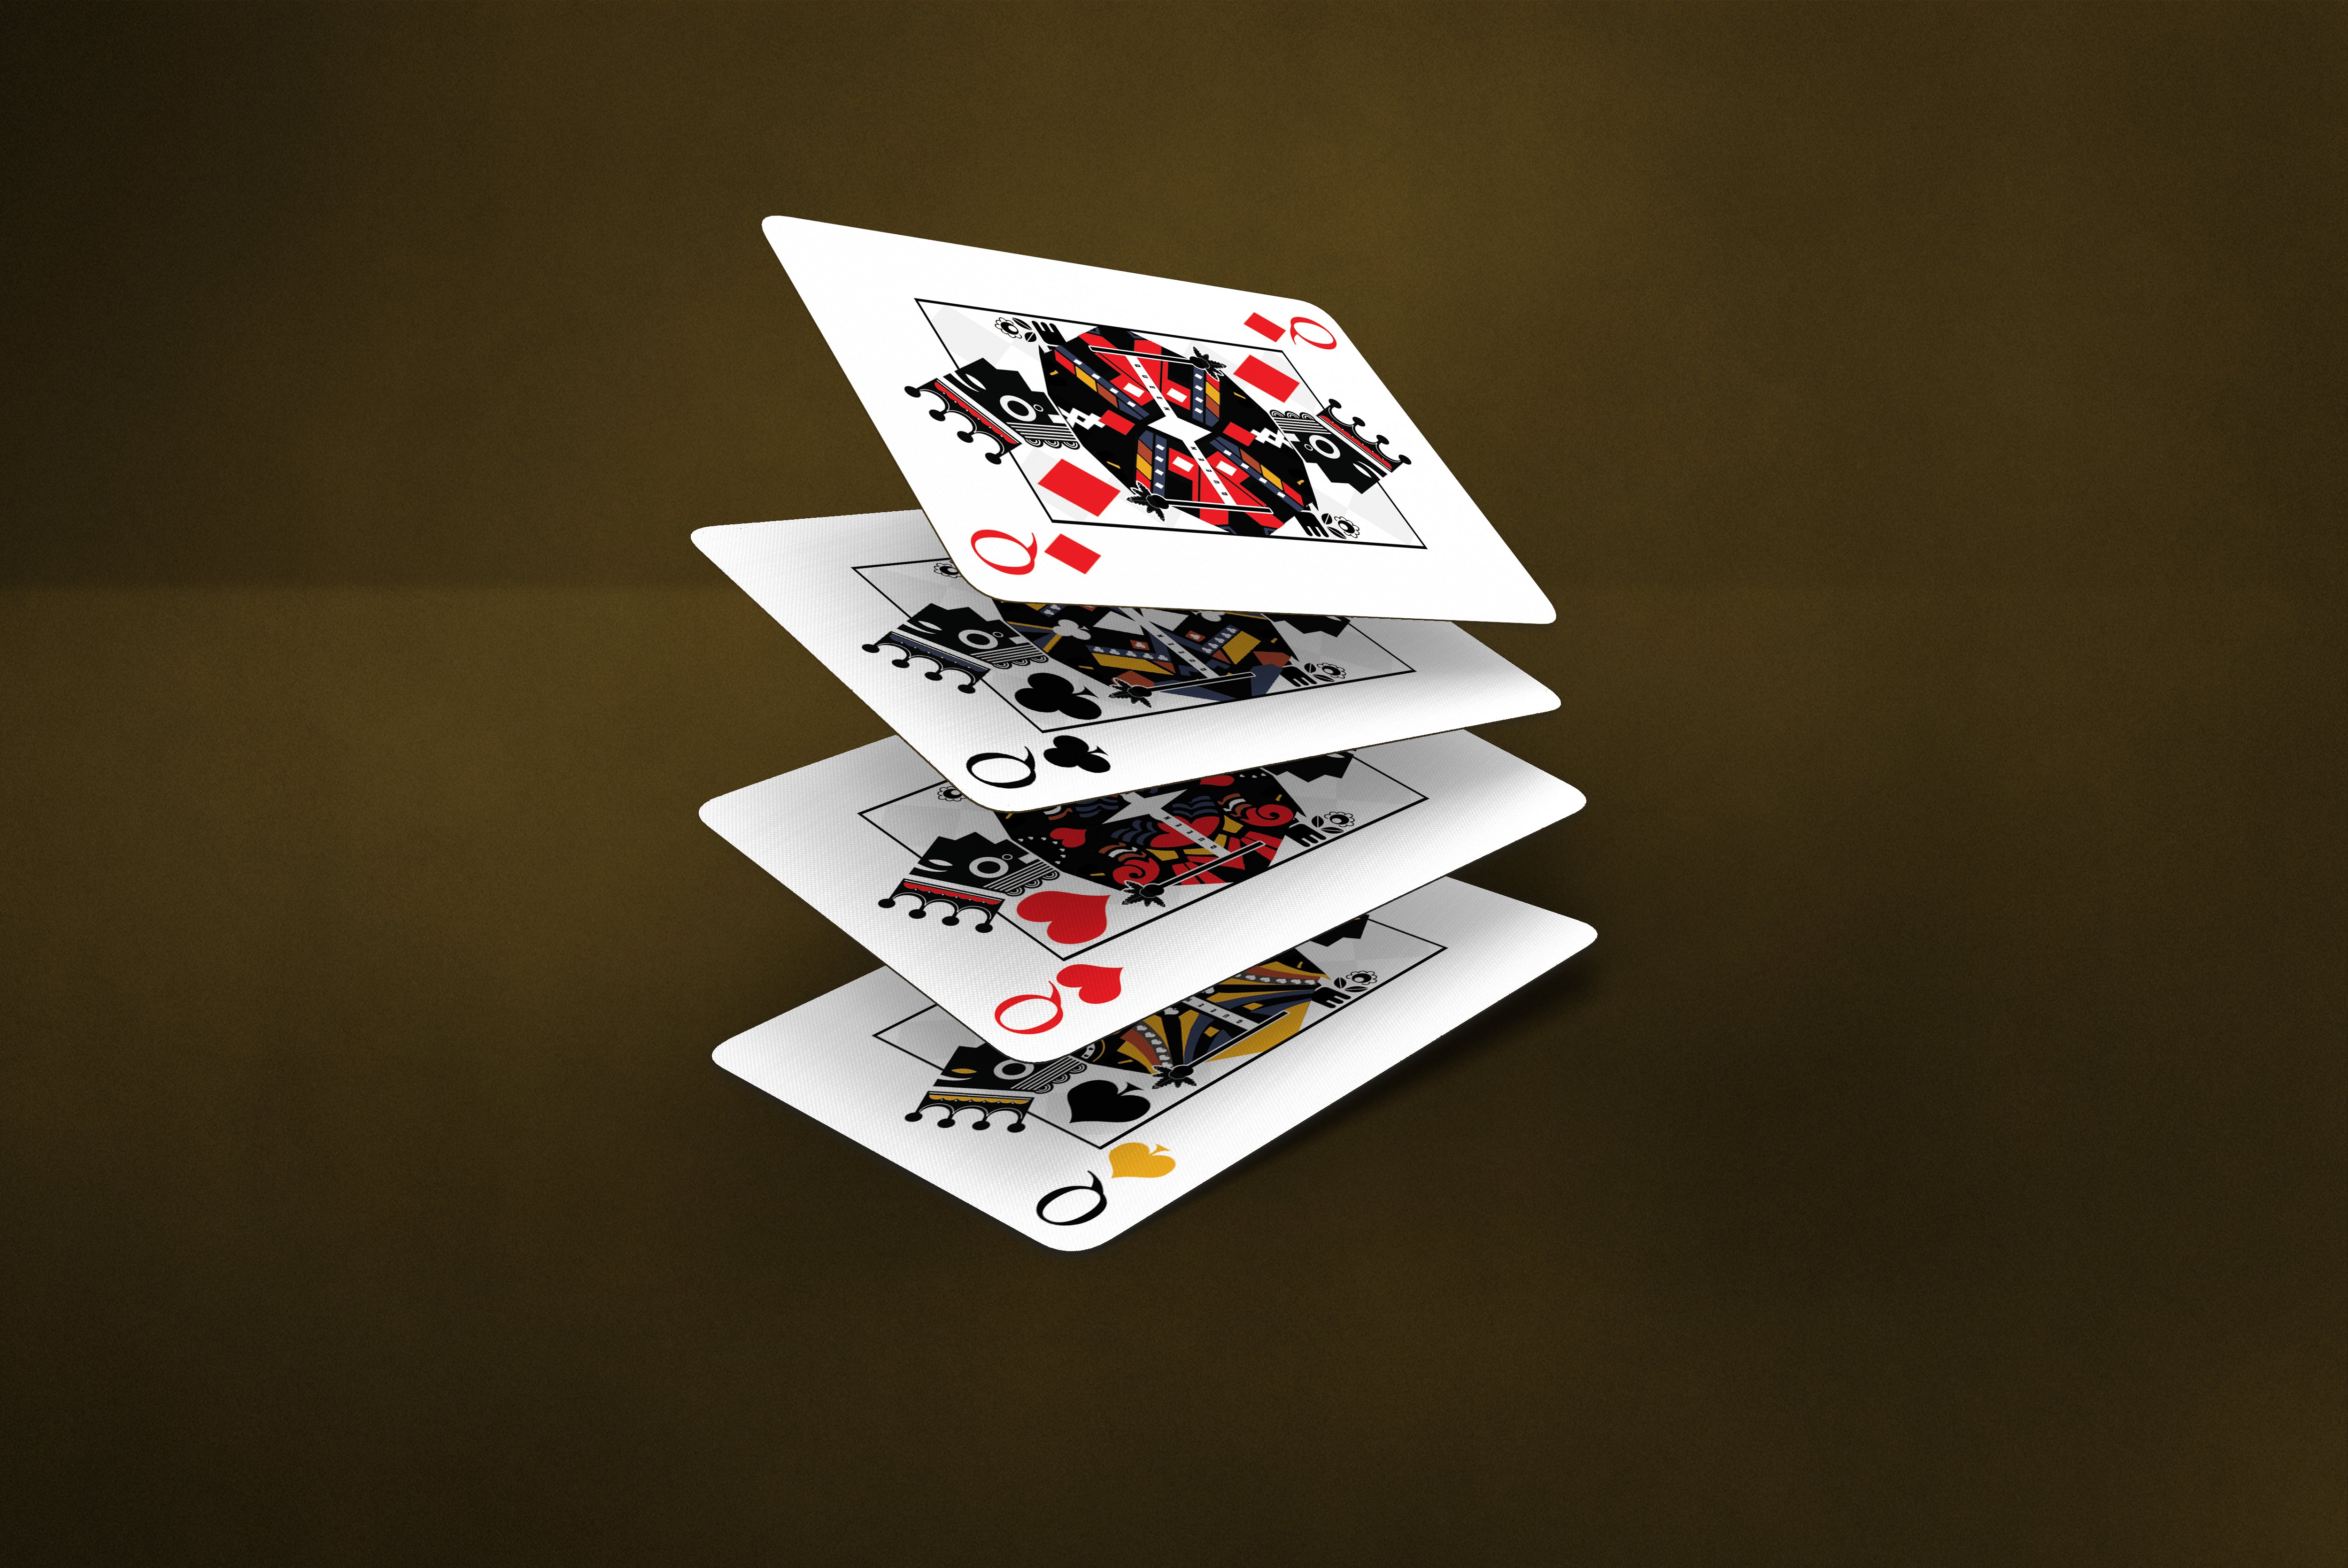 The Game of Spades "Expert" Deck, playing cards, spades cards, gold foiling, premium playing cards, no more writing on jokers